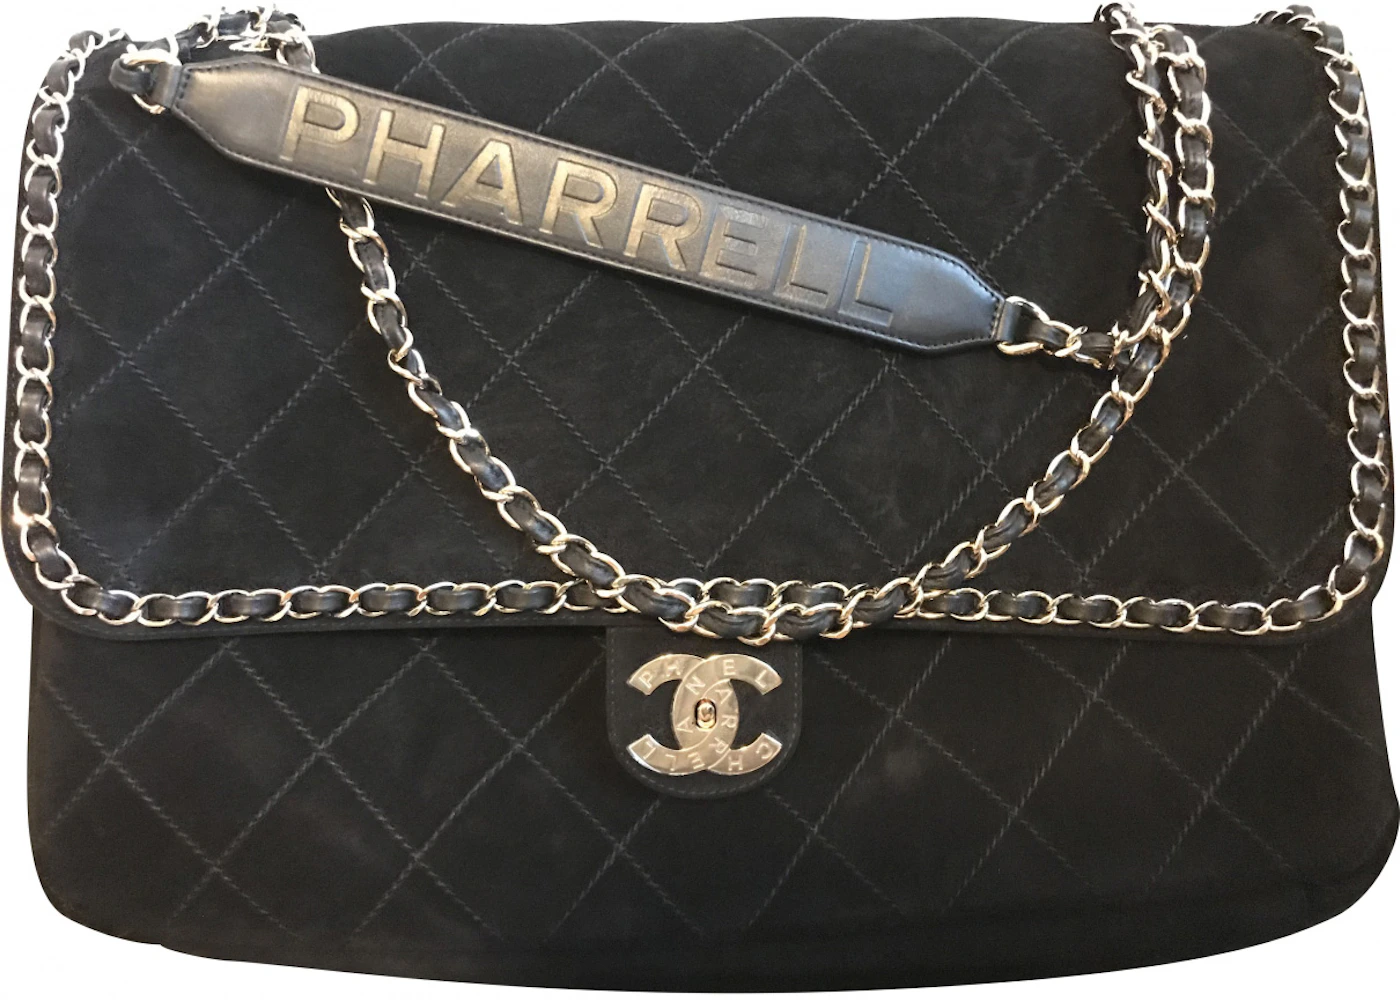 Chanel X Pharrell Flap Bag Xxl Black In Suede With Silver-Tone - Gb